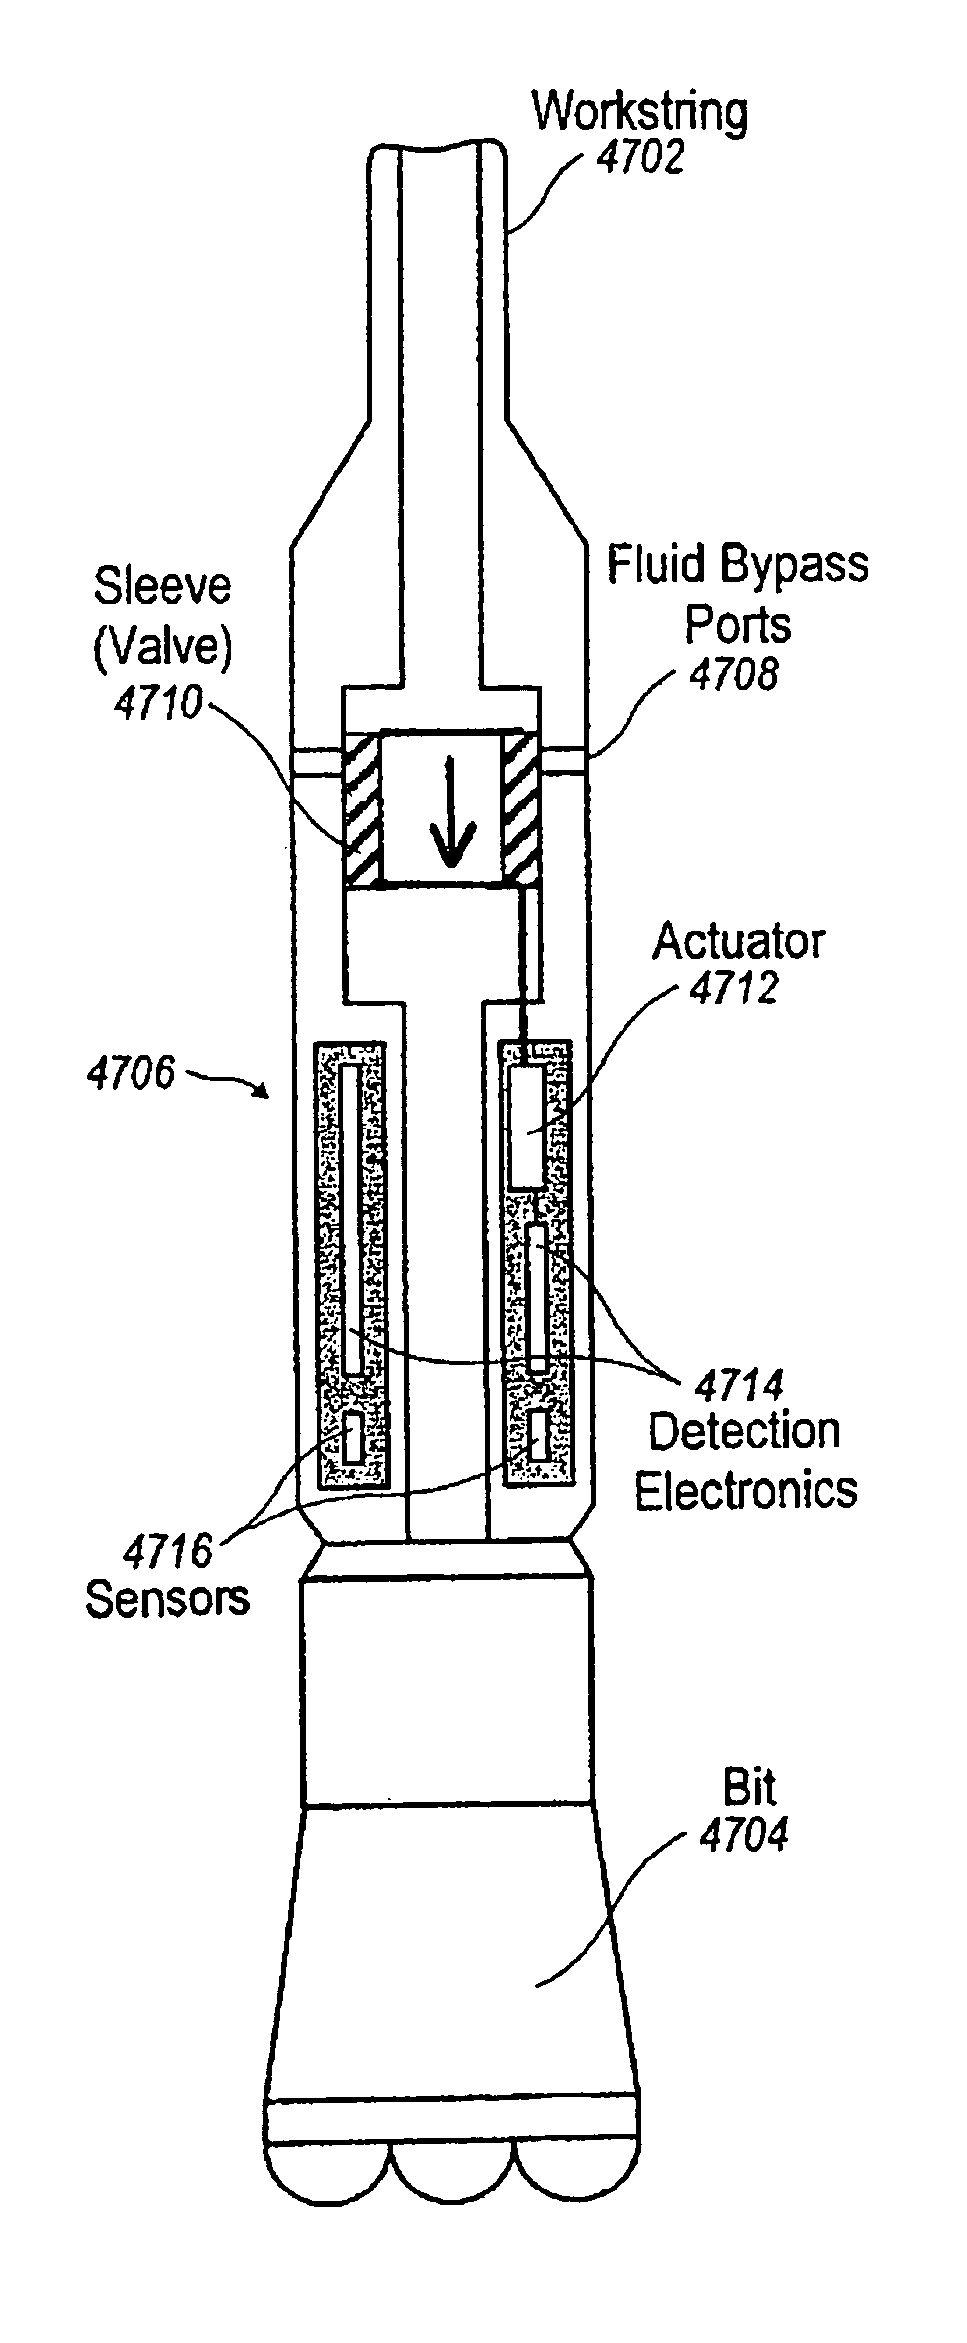 Method and apparatus for monitoring the condition of a downhole drill bit, and communicating the condition to the surface